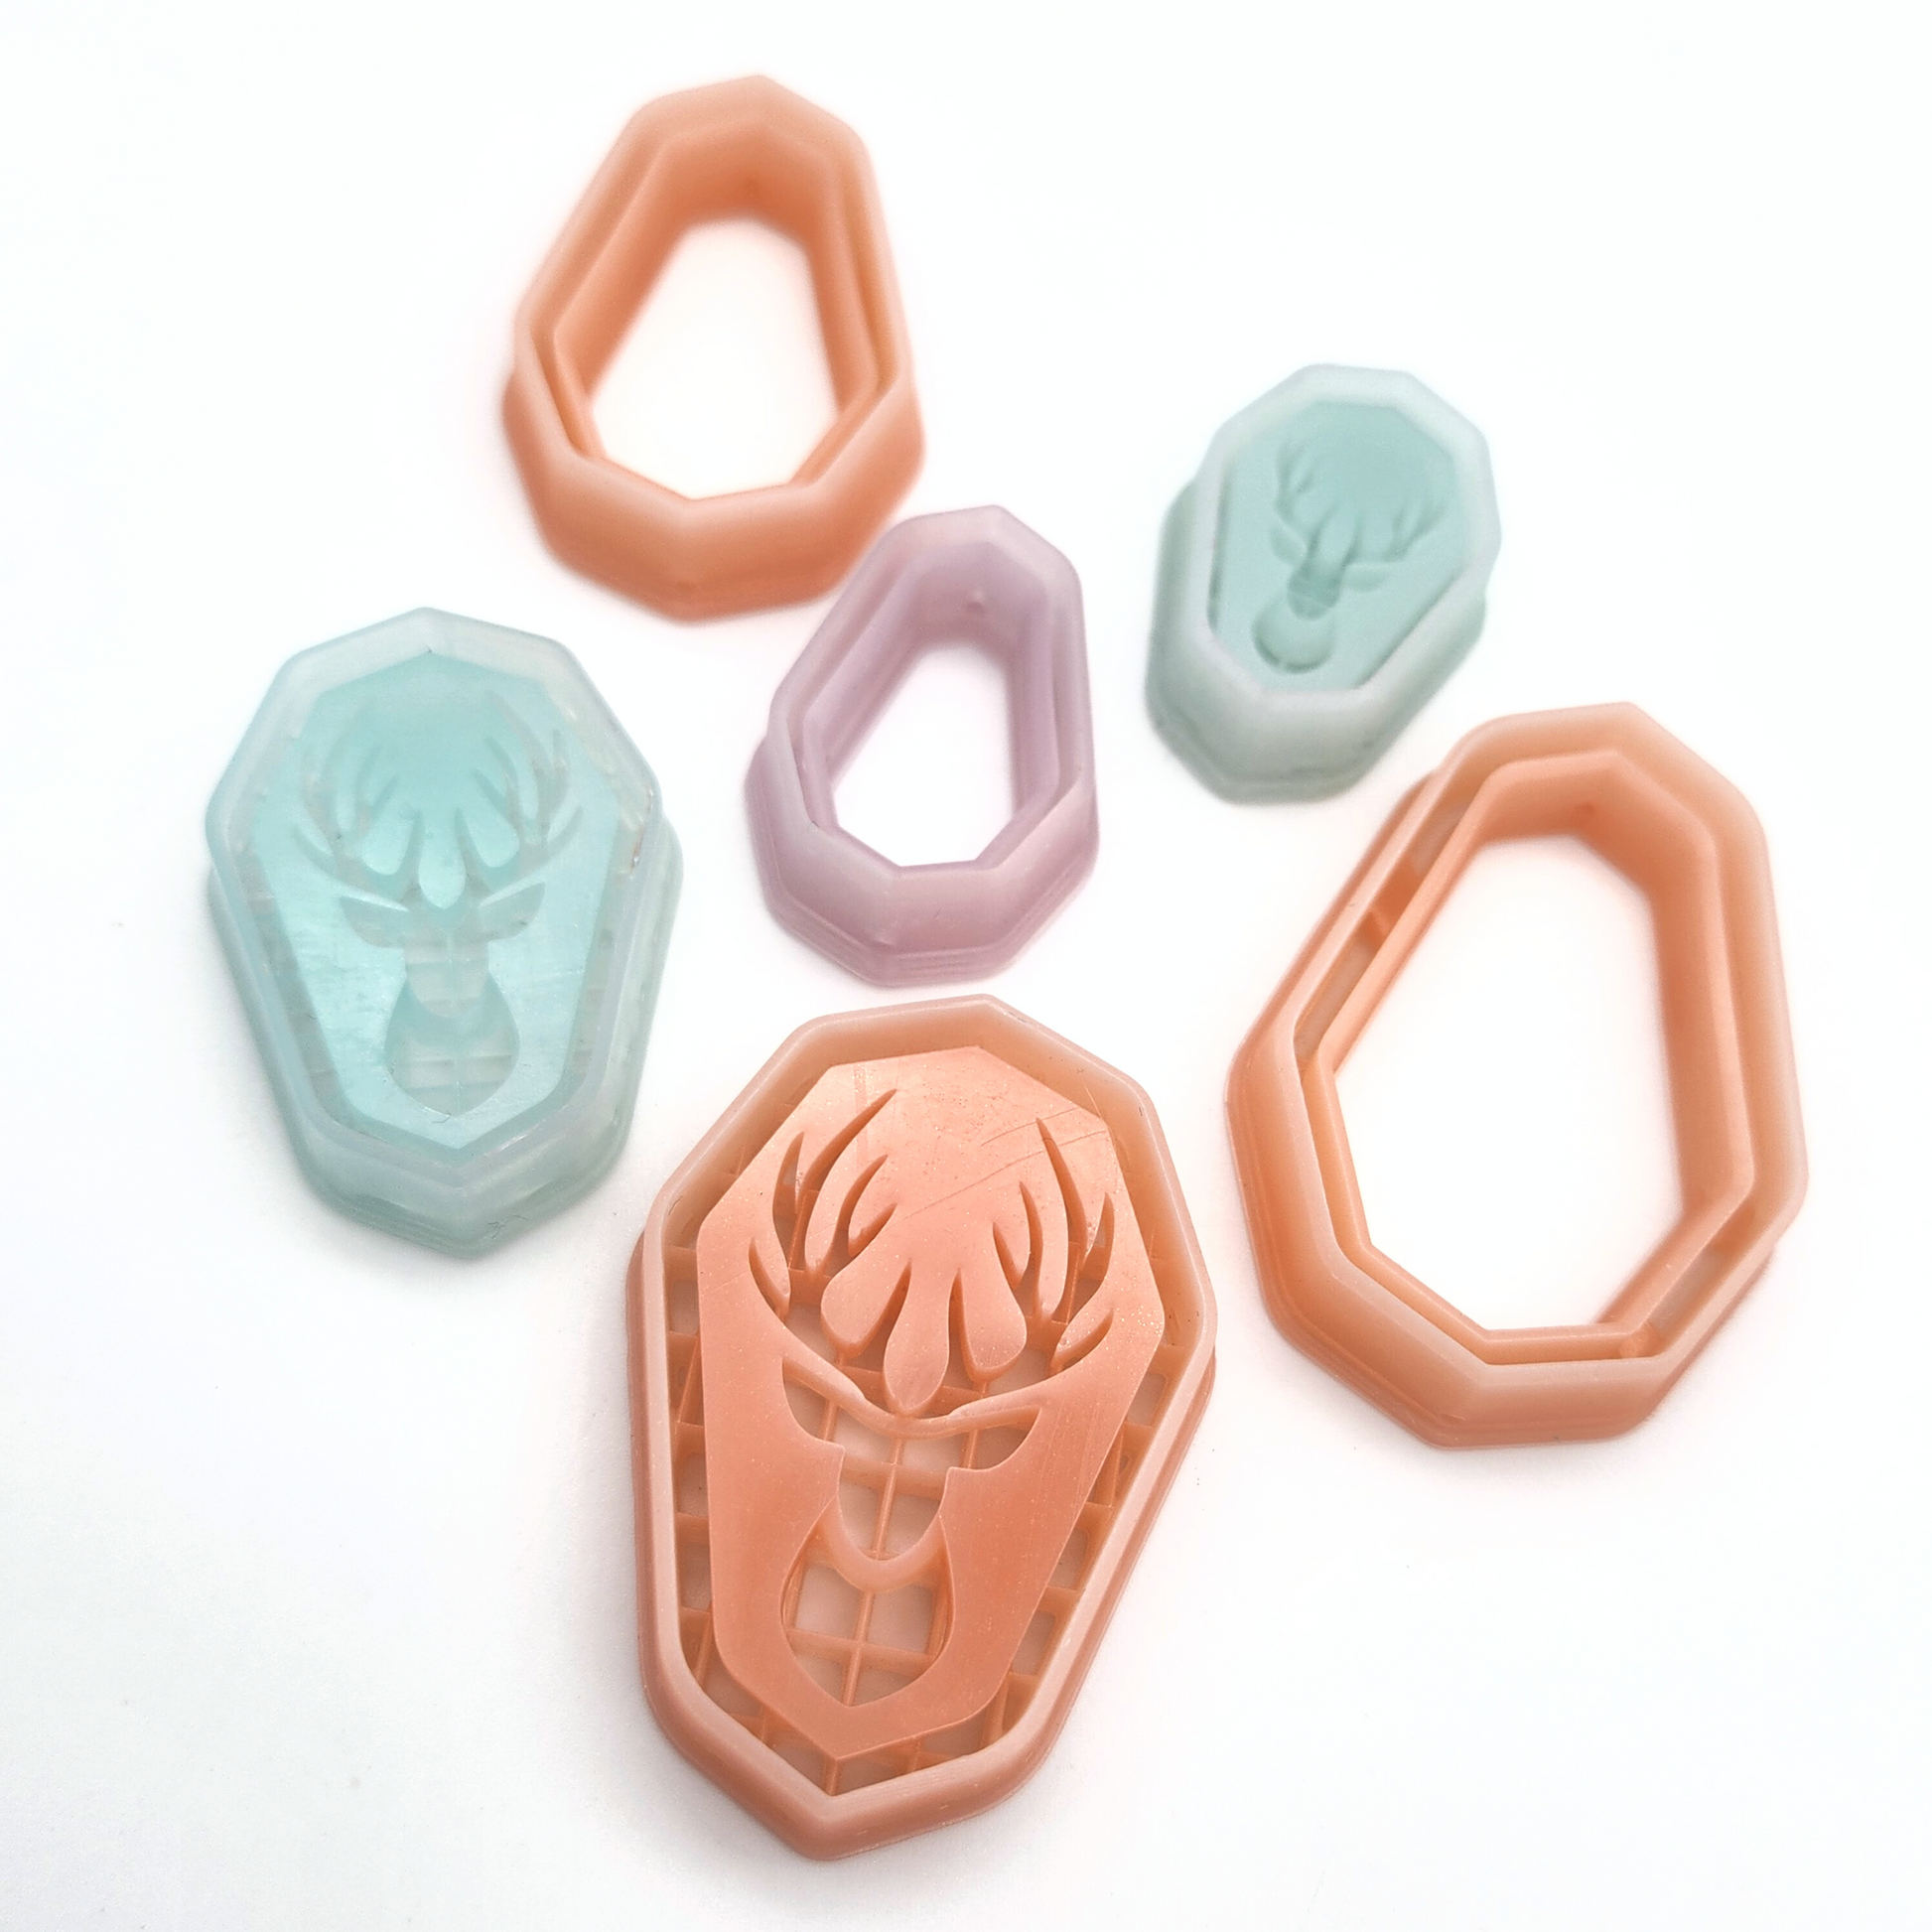 Reindeer Amulet polymer clay cutters featuring both detailed debossing and outline cutters